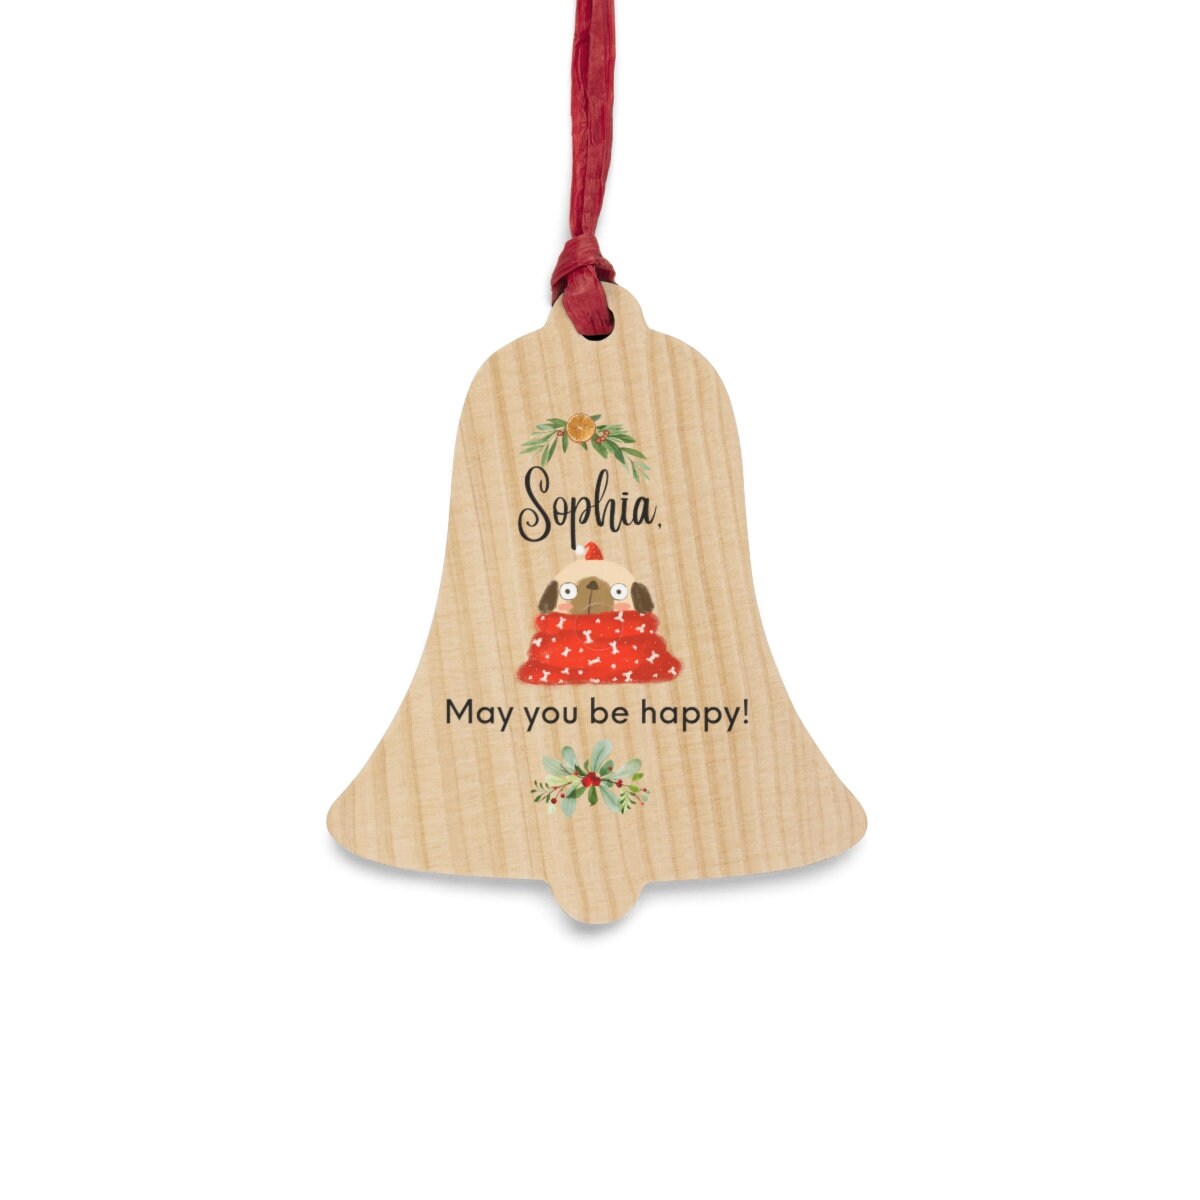 Personalized Wooden Christmas Ornaments, Custom Ornaments, Personalized Thoughtful gift